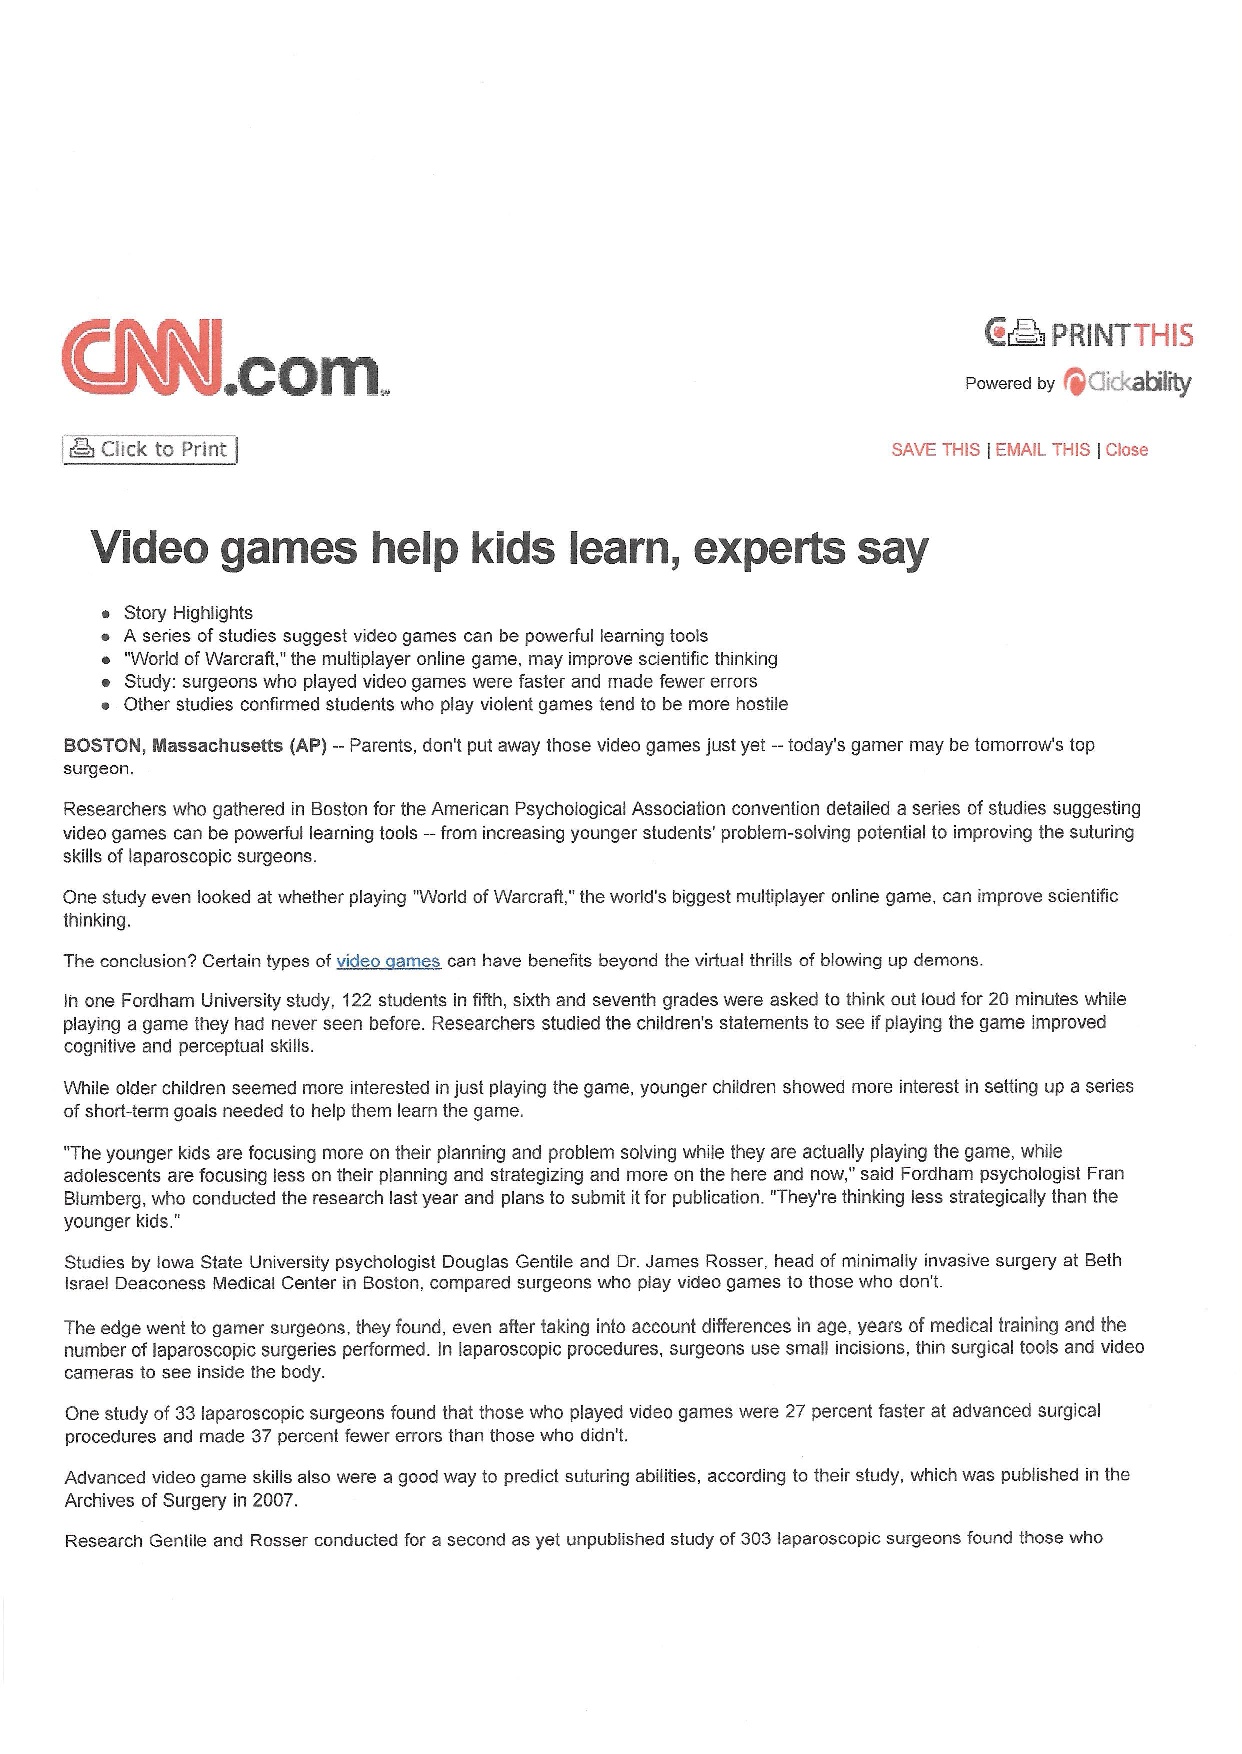 CNN Article Page 1 of 2